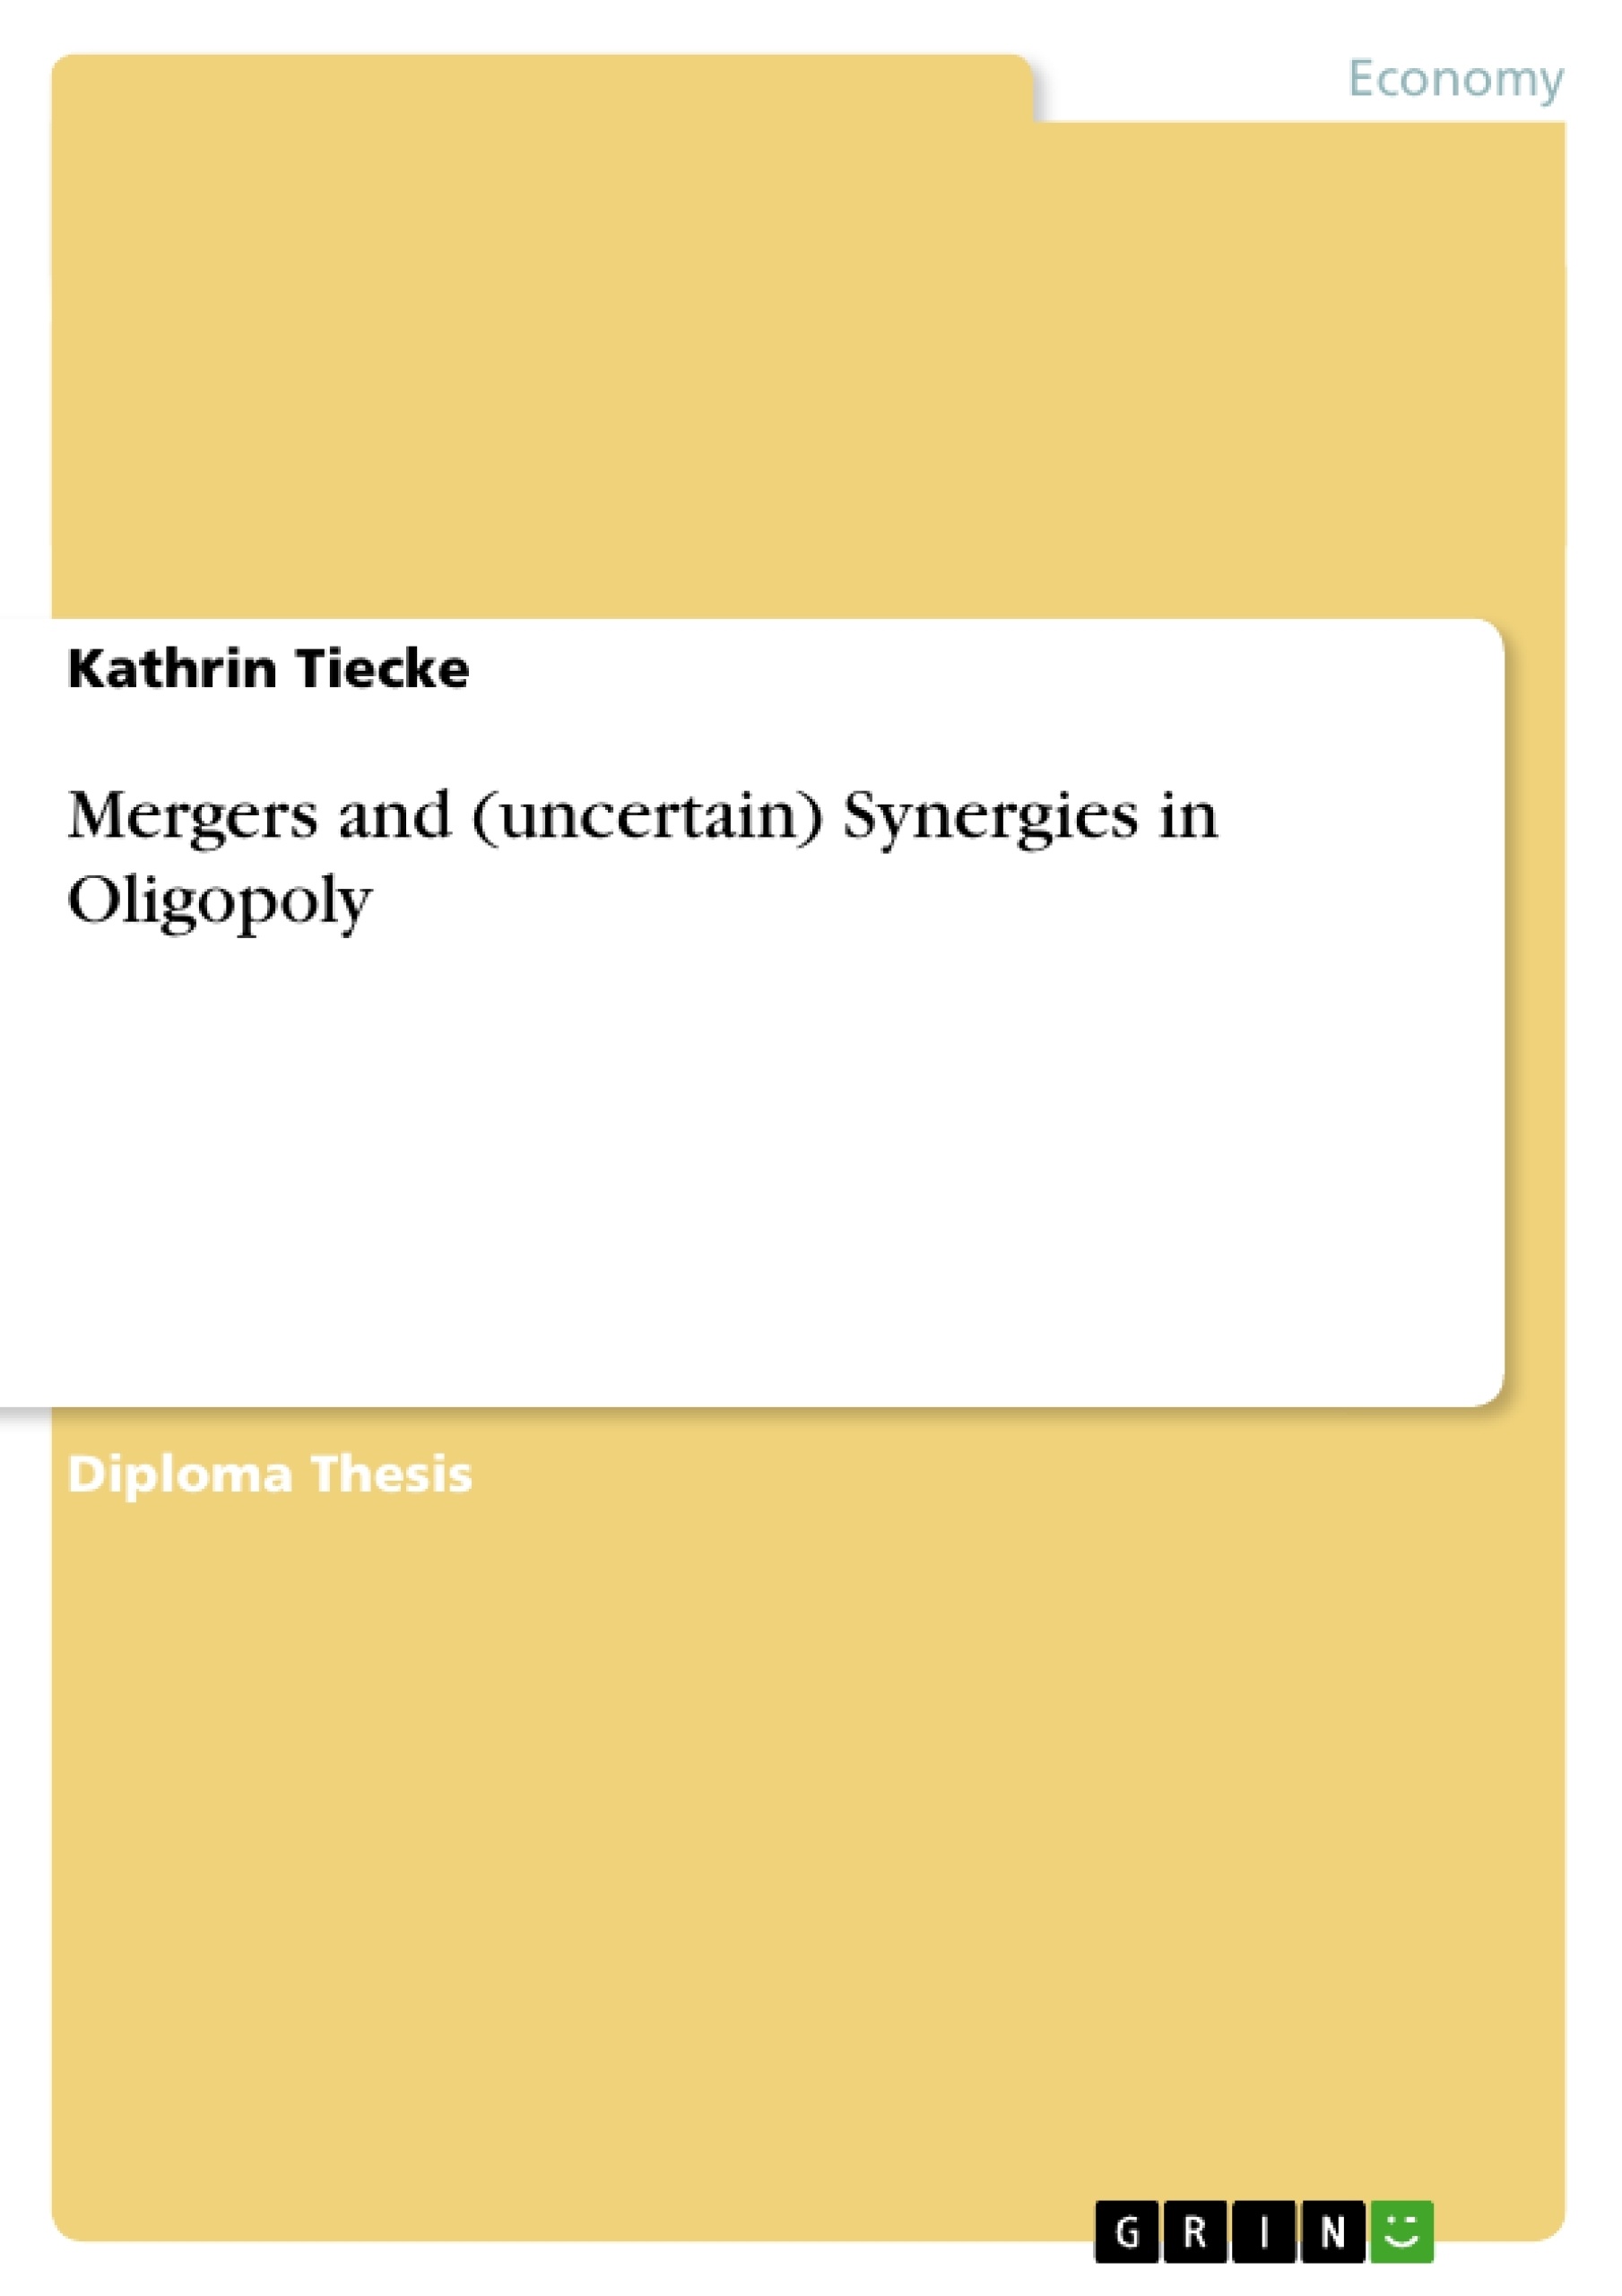 Titre: Mergers and (uncertain) Synergies in Oligopoly